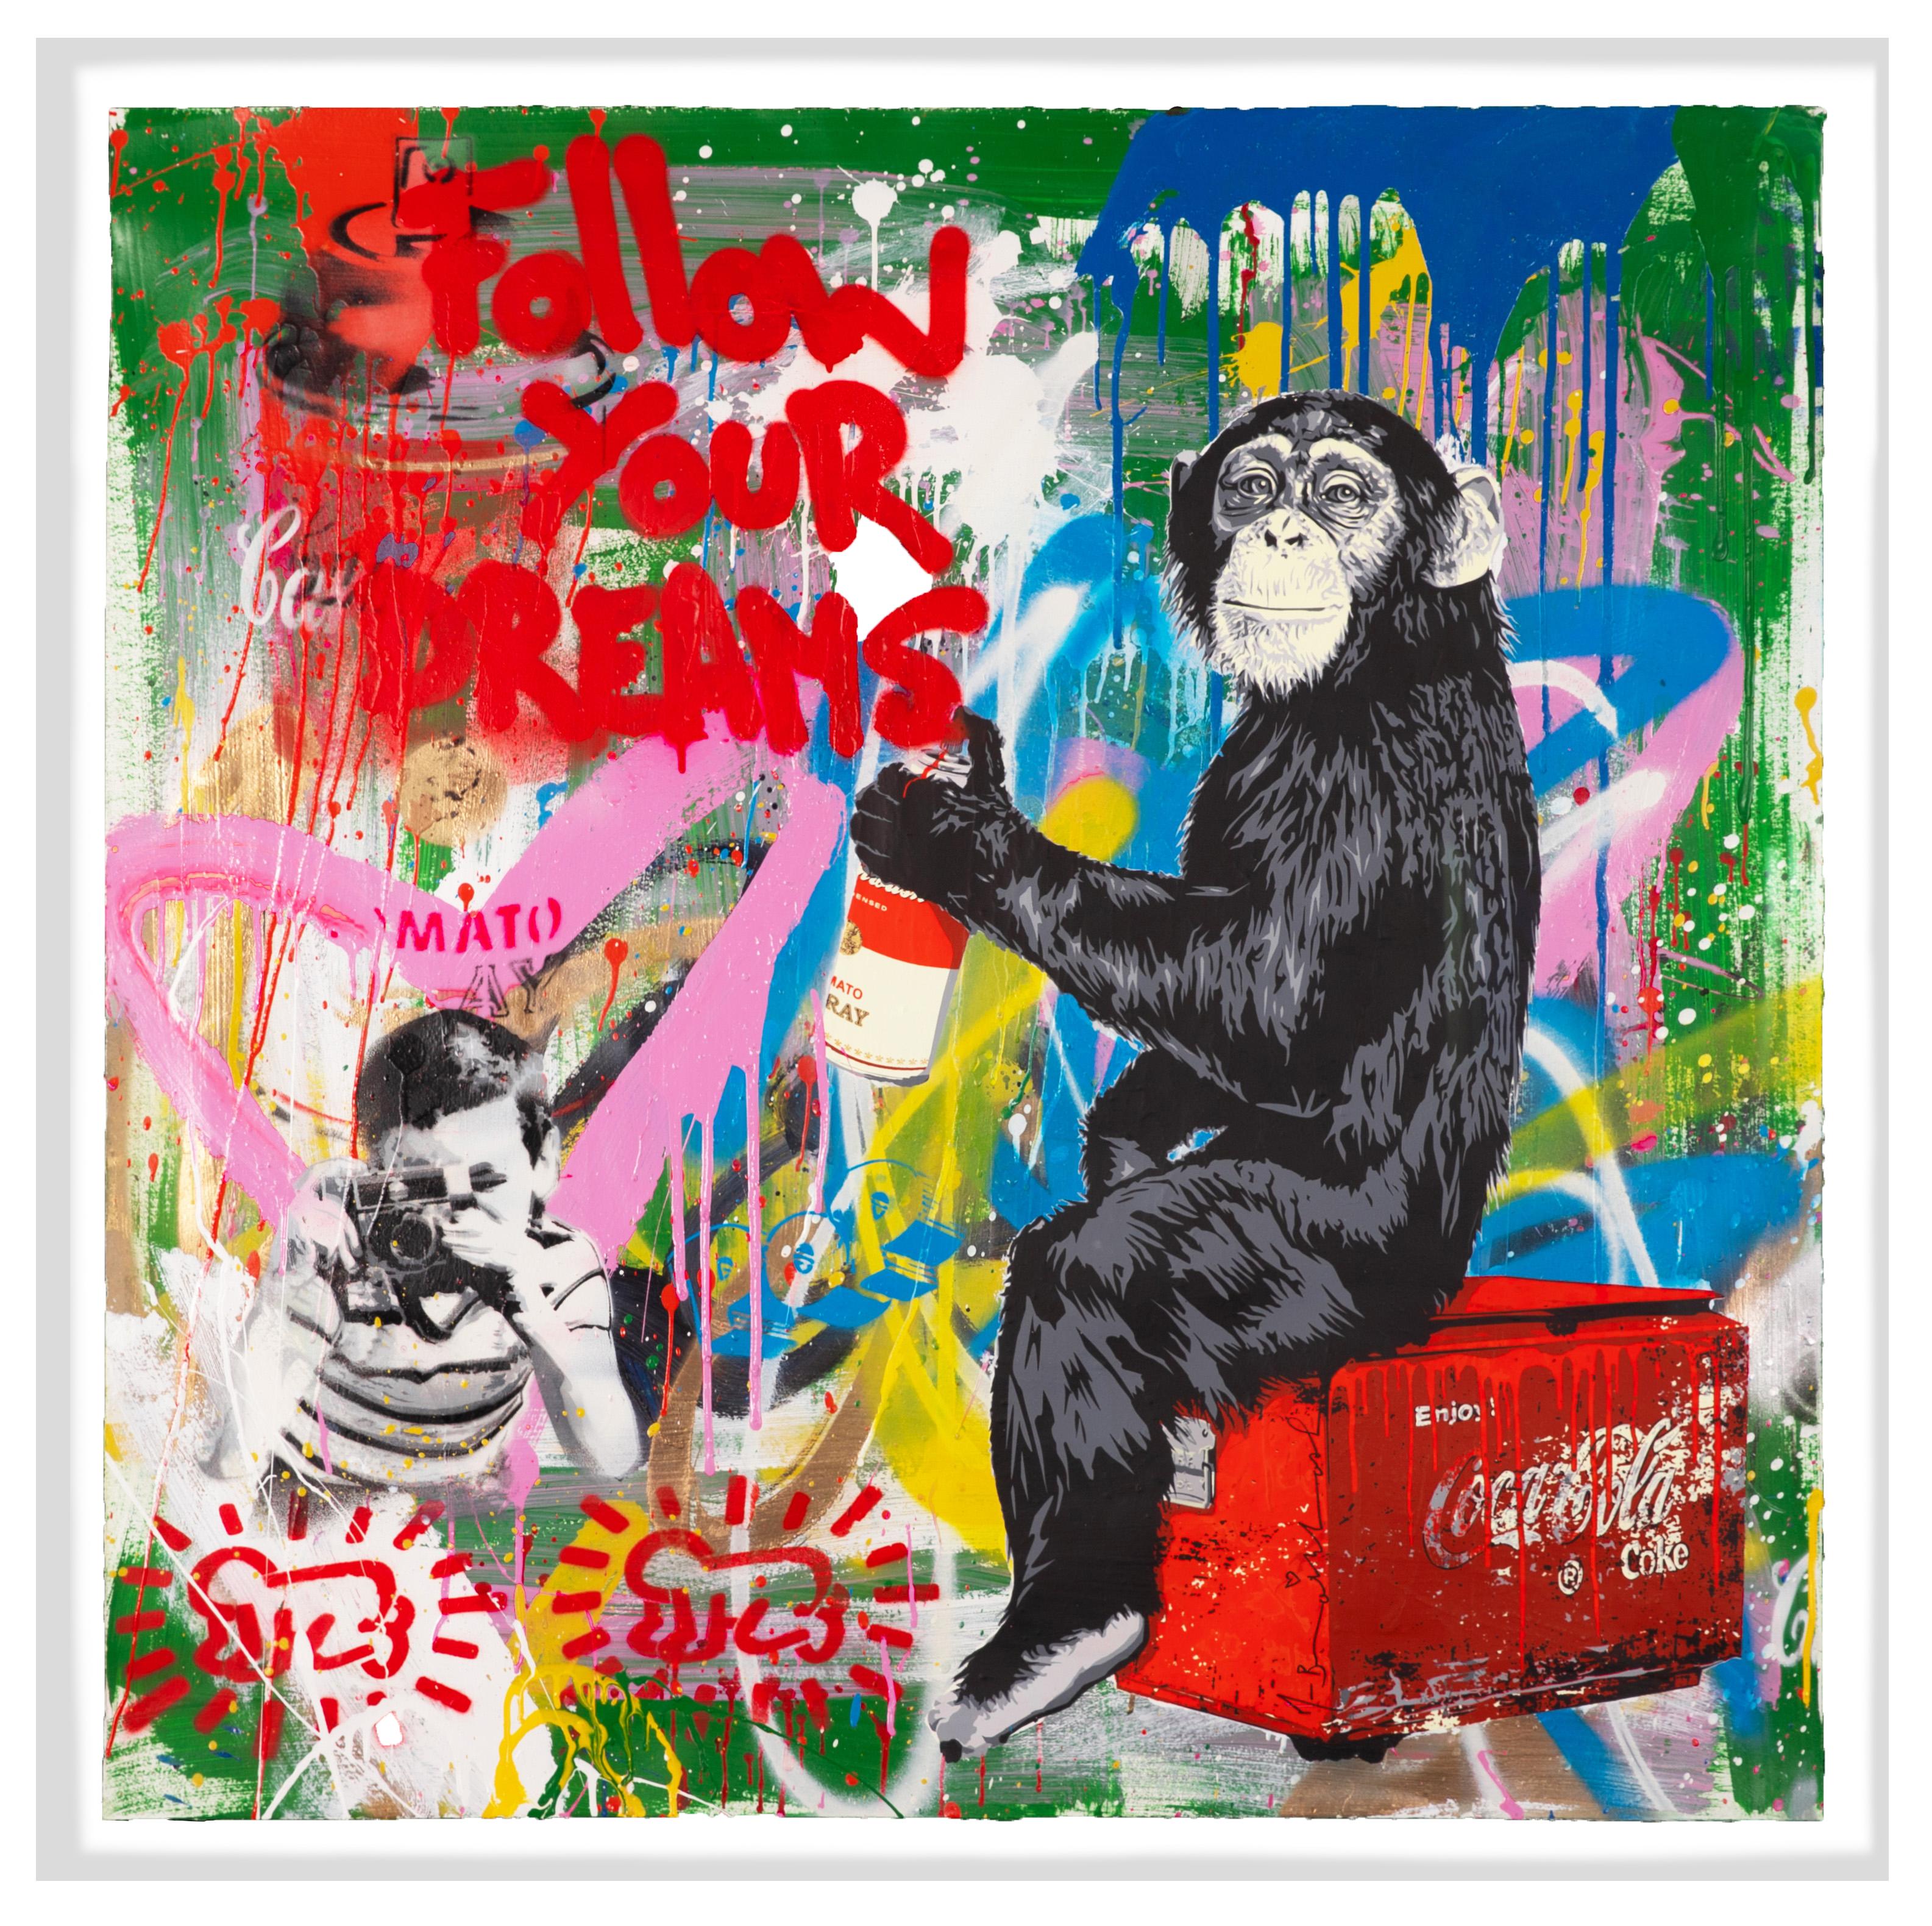 Mr. Brainwash Abstract Painting - 'Follow Your Dreams Monkey' Pop Art Collage Painting, 2020